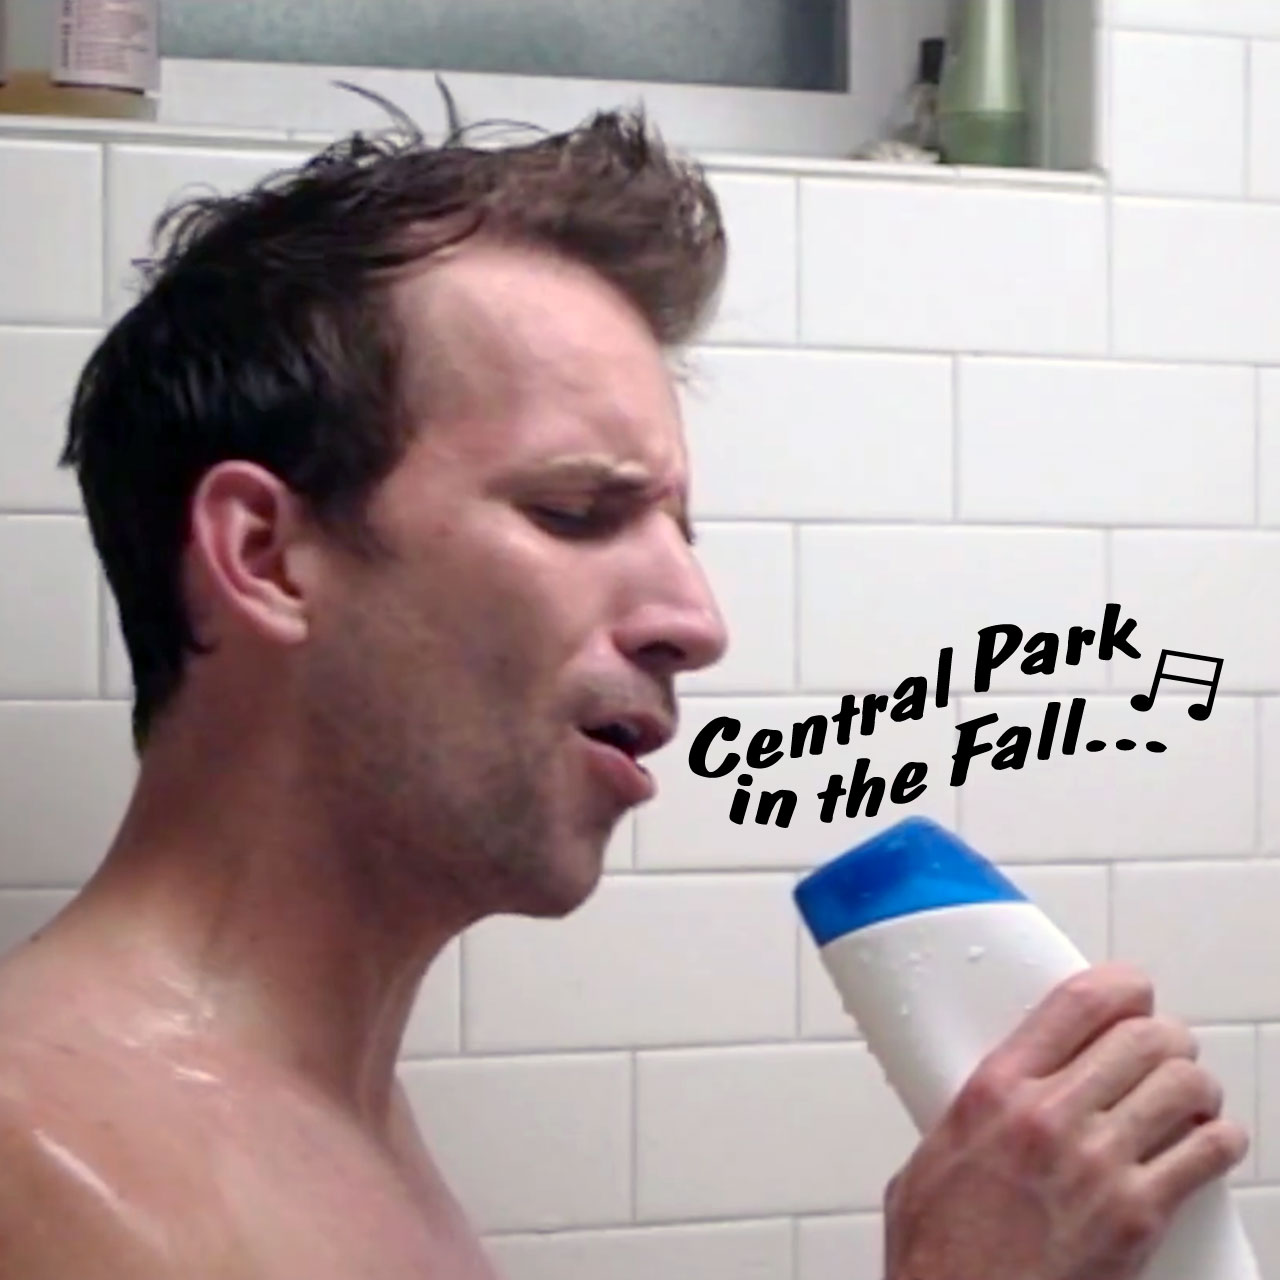 Mike Magee Plays the lead in spoof of "Ferris Bueller's Day Off"